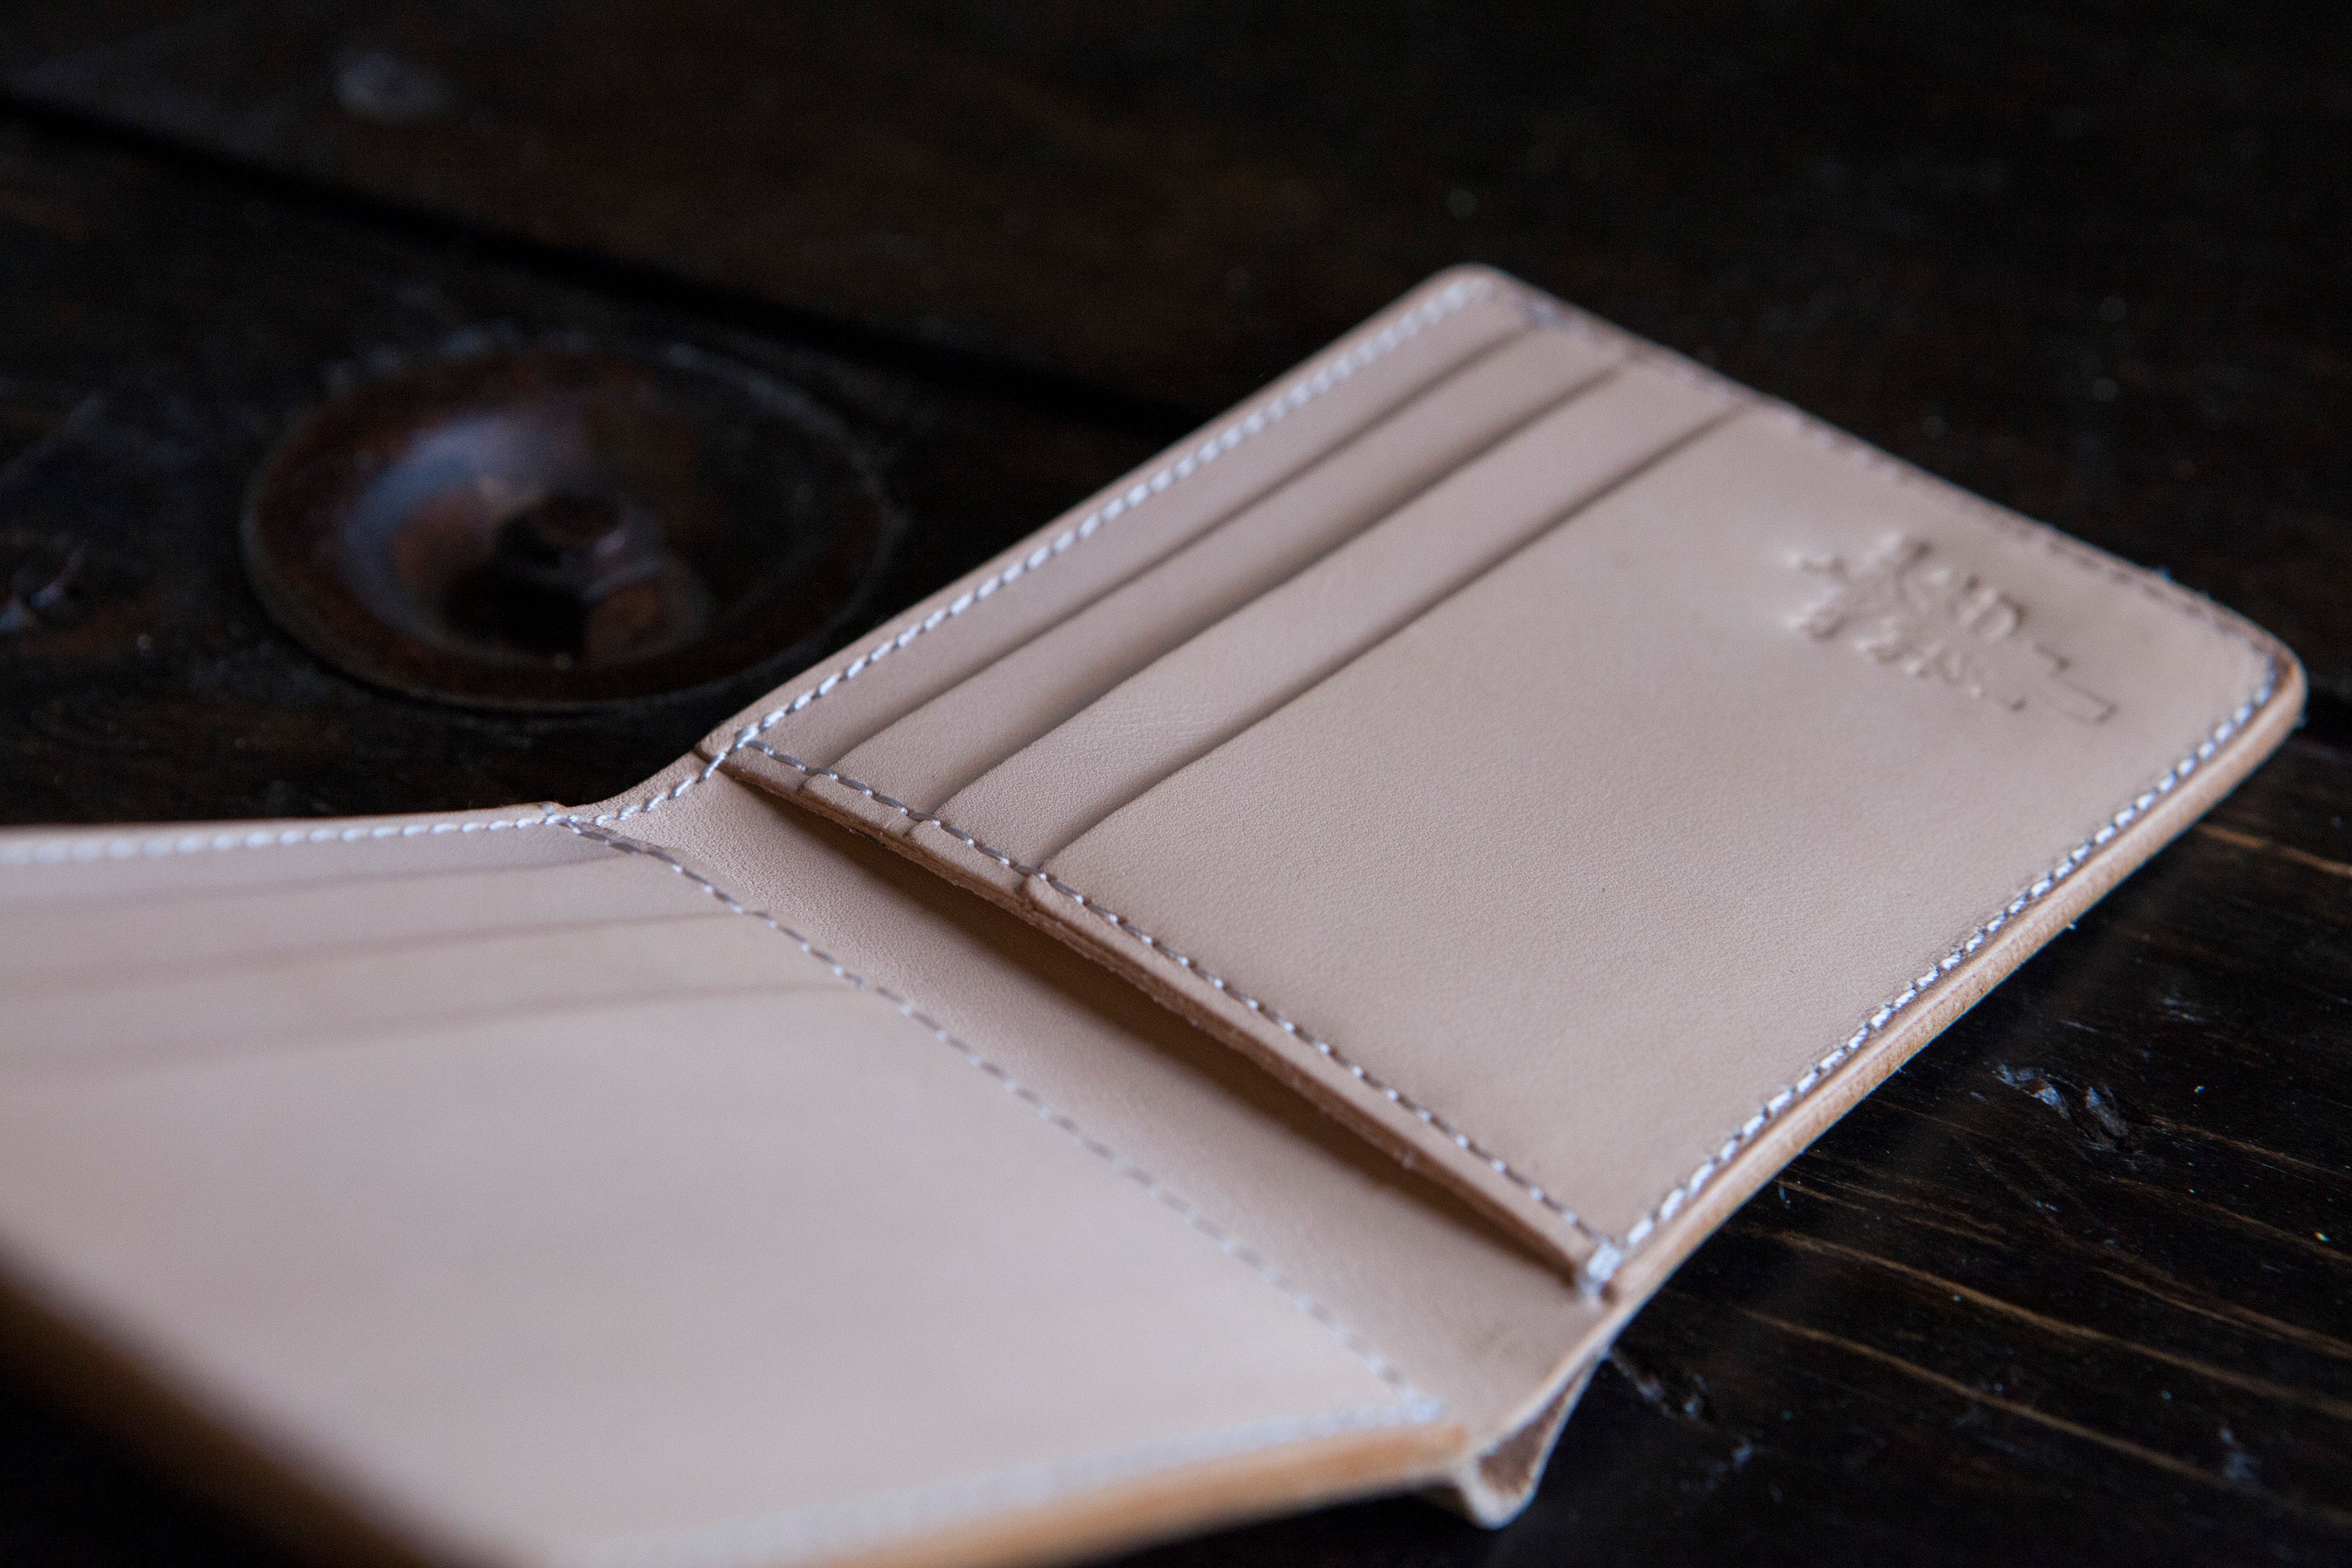 Wagtail Thar Vegetable Tanned Leather Bifold Men's Wallet